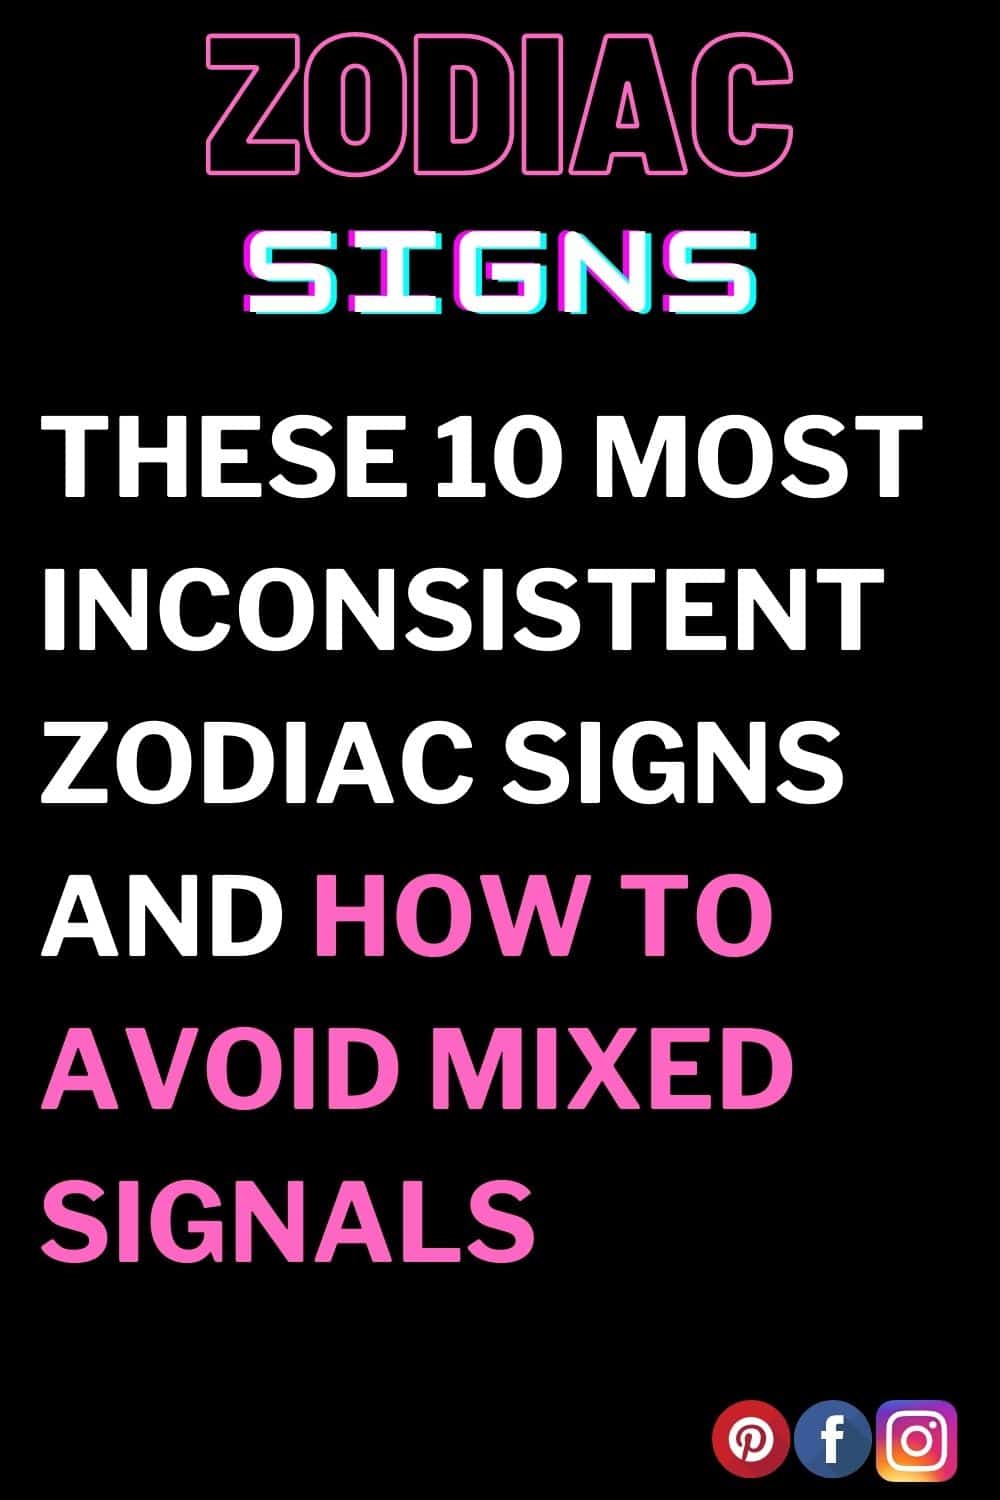 These 10 Most Inconsistent Zodiac Signs and How to Avoid Mixed Signals